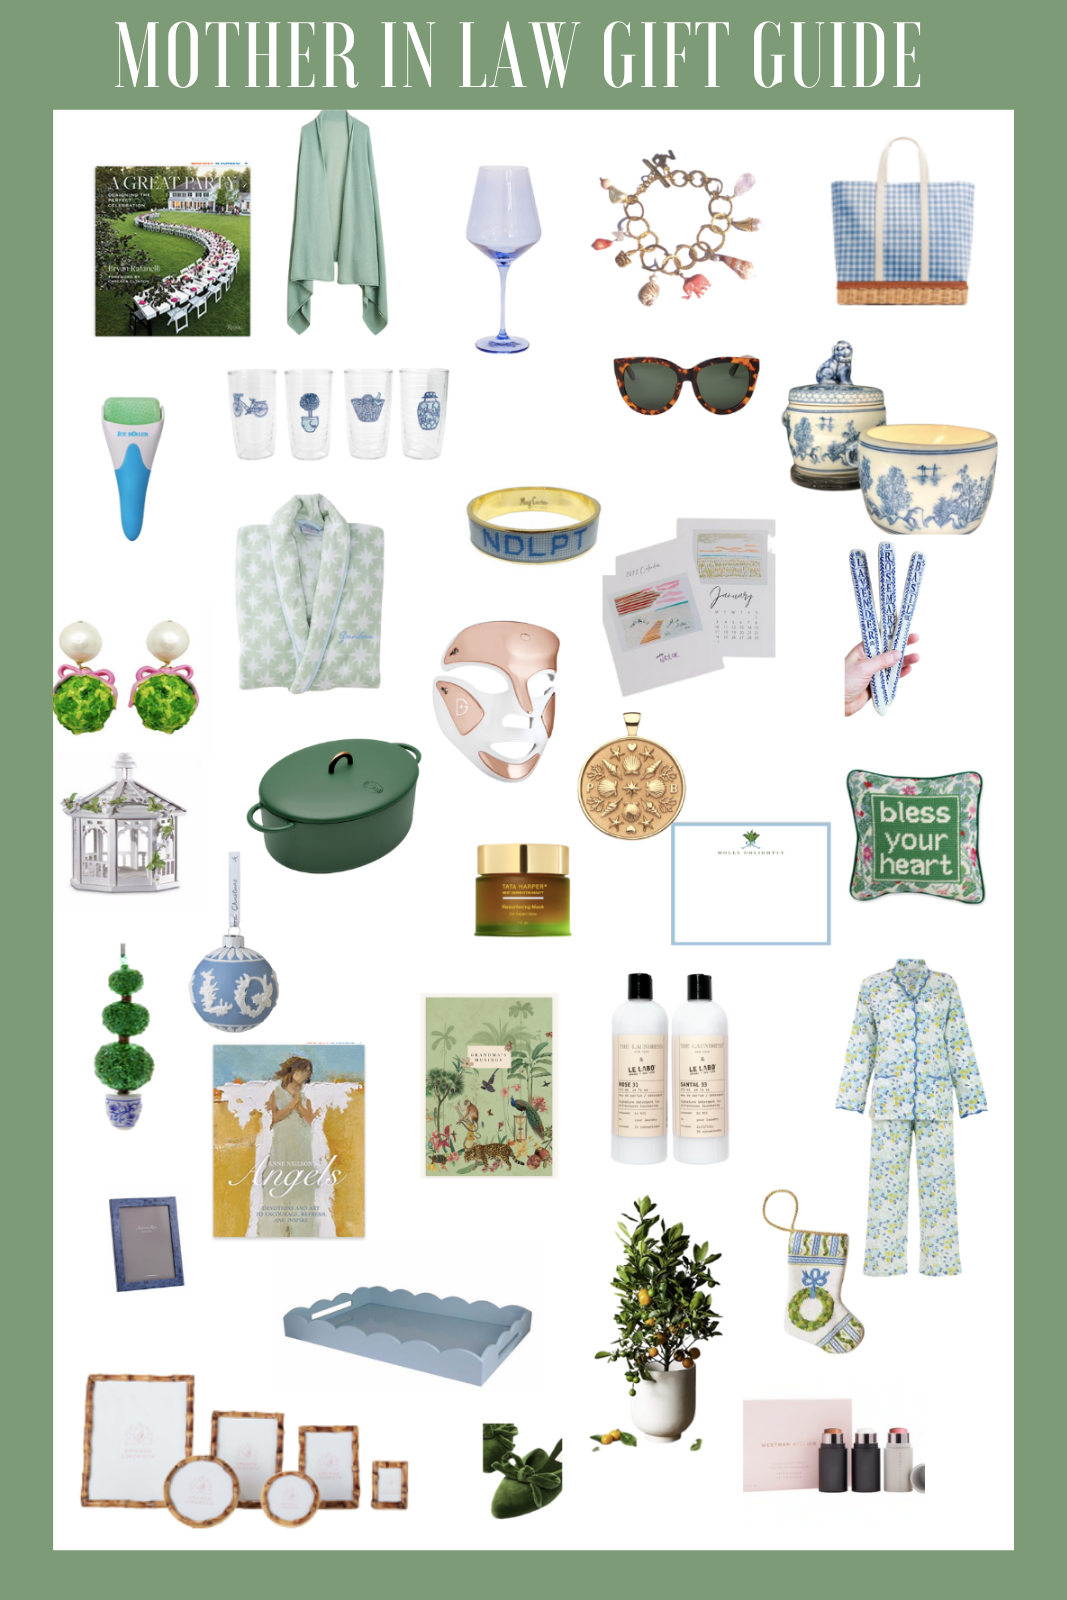 The Guides: Mother In Law Gift Guide 2020 - Olive and Tate